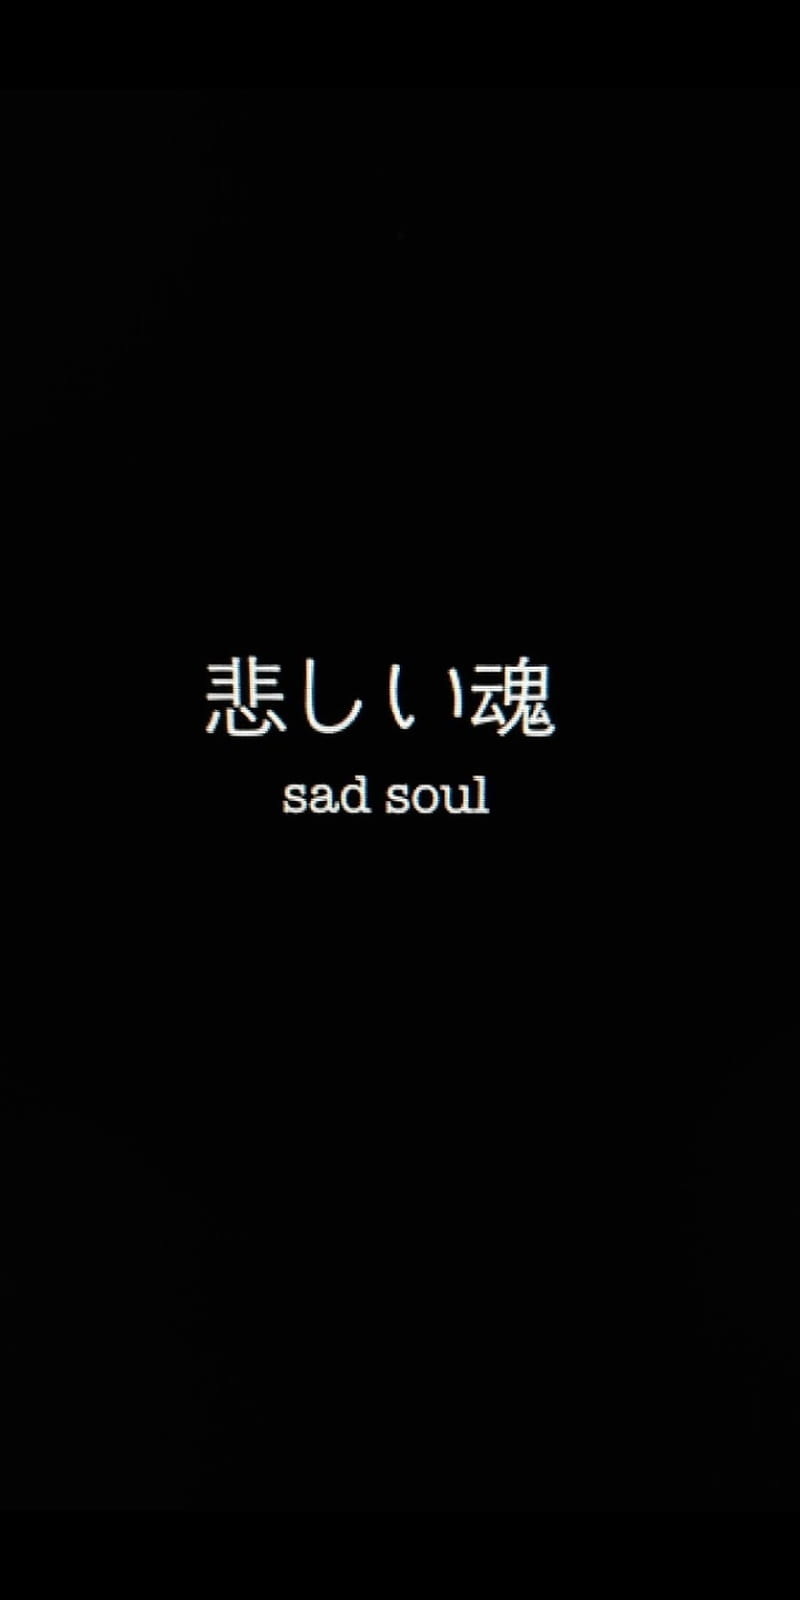 Aesthetic Japanese Quotes | vlr.eng.br